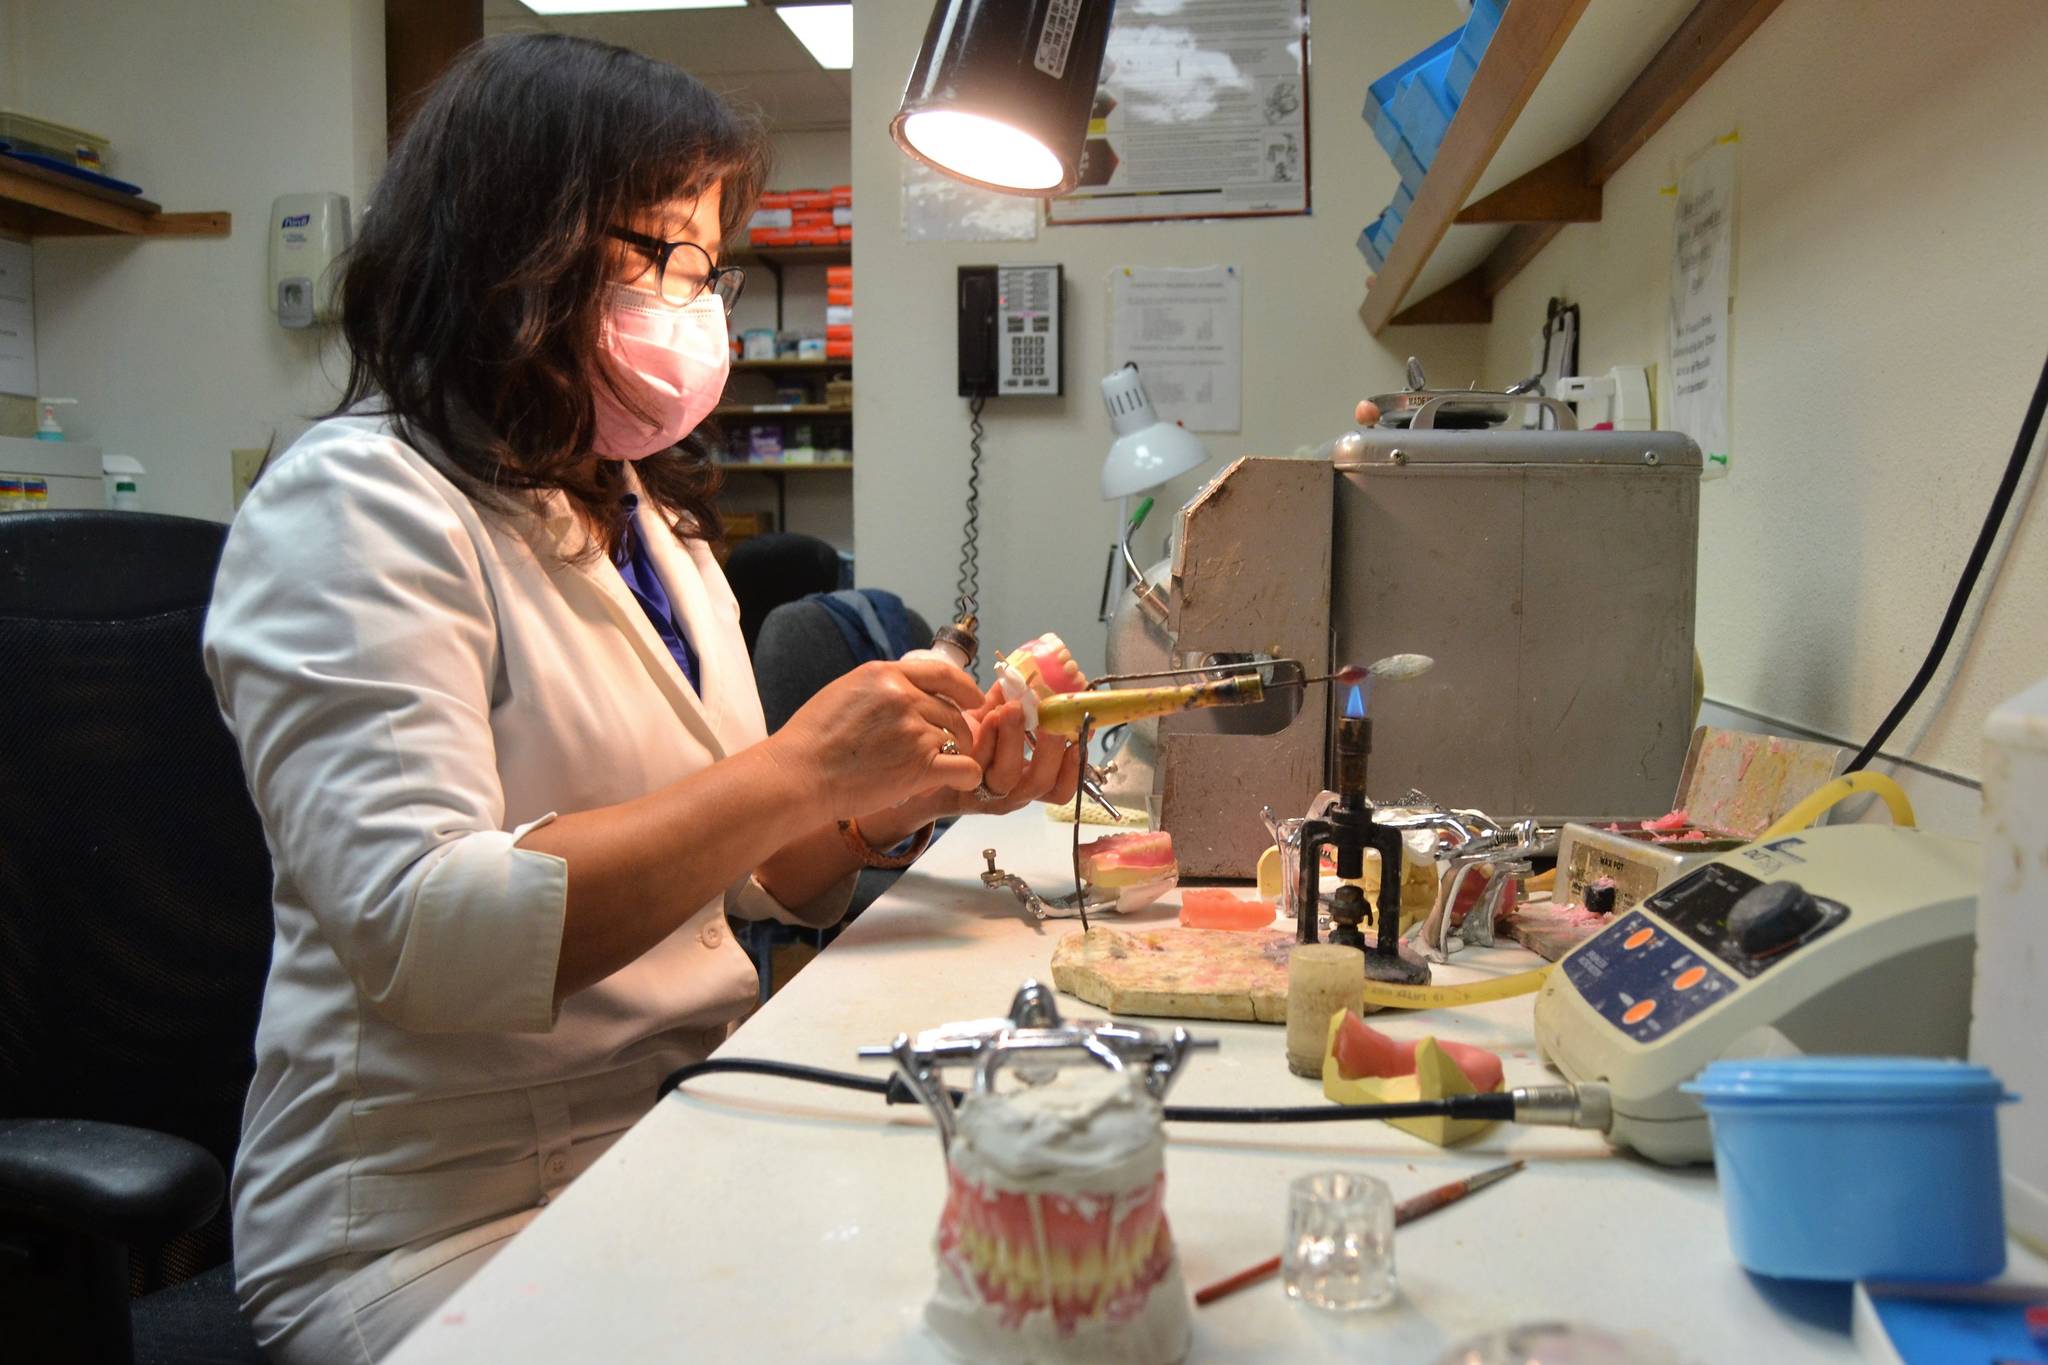 Lien Trinh, owner of DentureCare Inc., prepares some dentures for patients at her West Spruce Street business. She’s one of many Sequim businesses slated to receive a business grant from the City of Sequim to help during the pandemic. Sequim Gazette photo by Matthew Nash